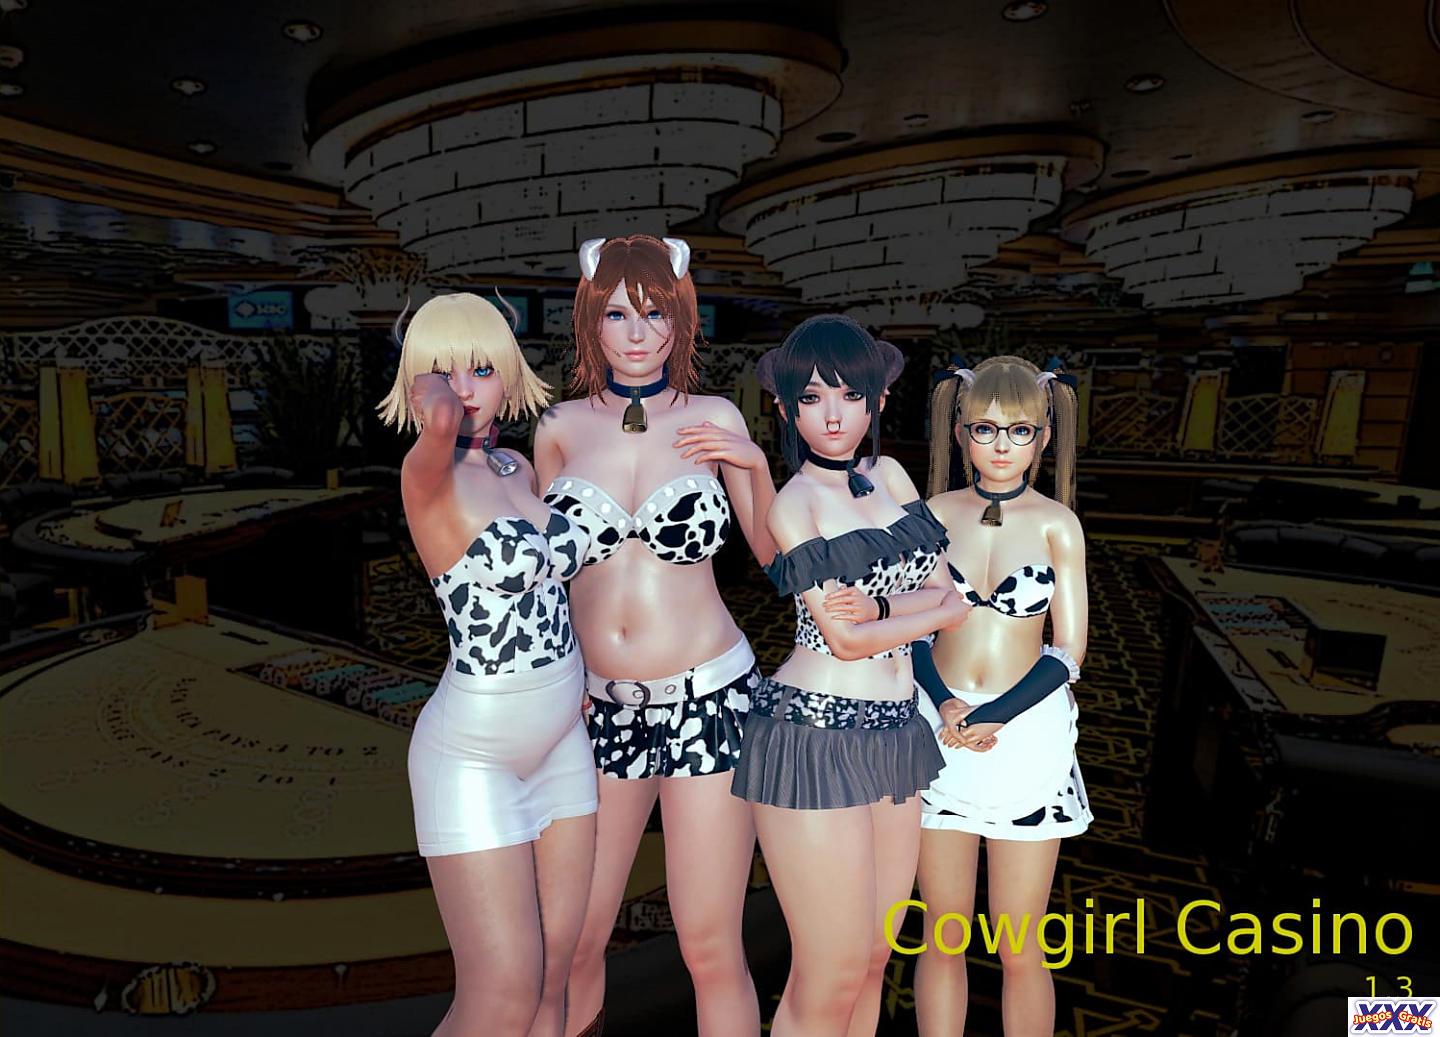 COWGIRL CASINO [ANONYMOOSE PRODUCTIONS] [FINAL VERSION]